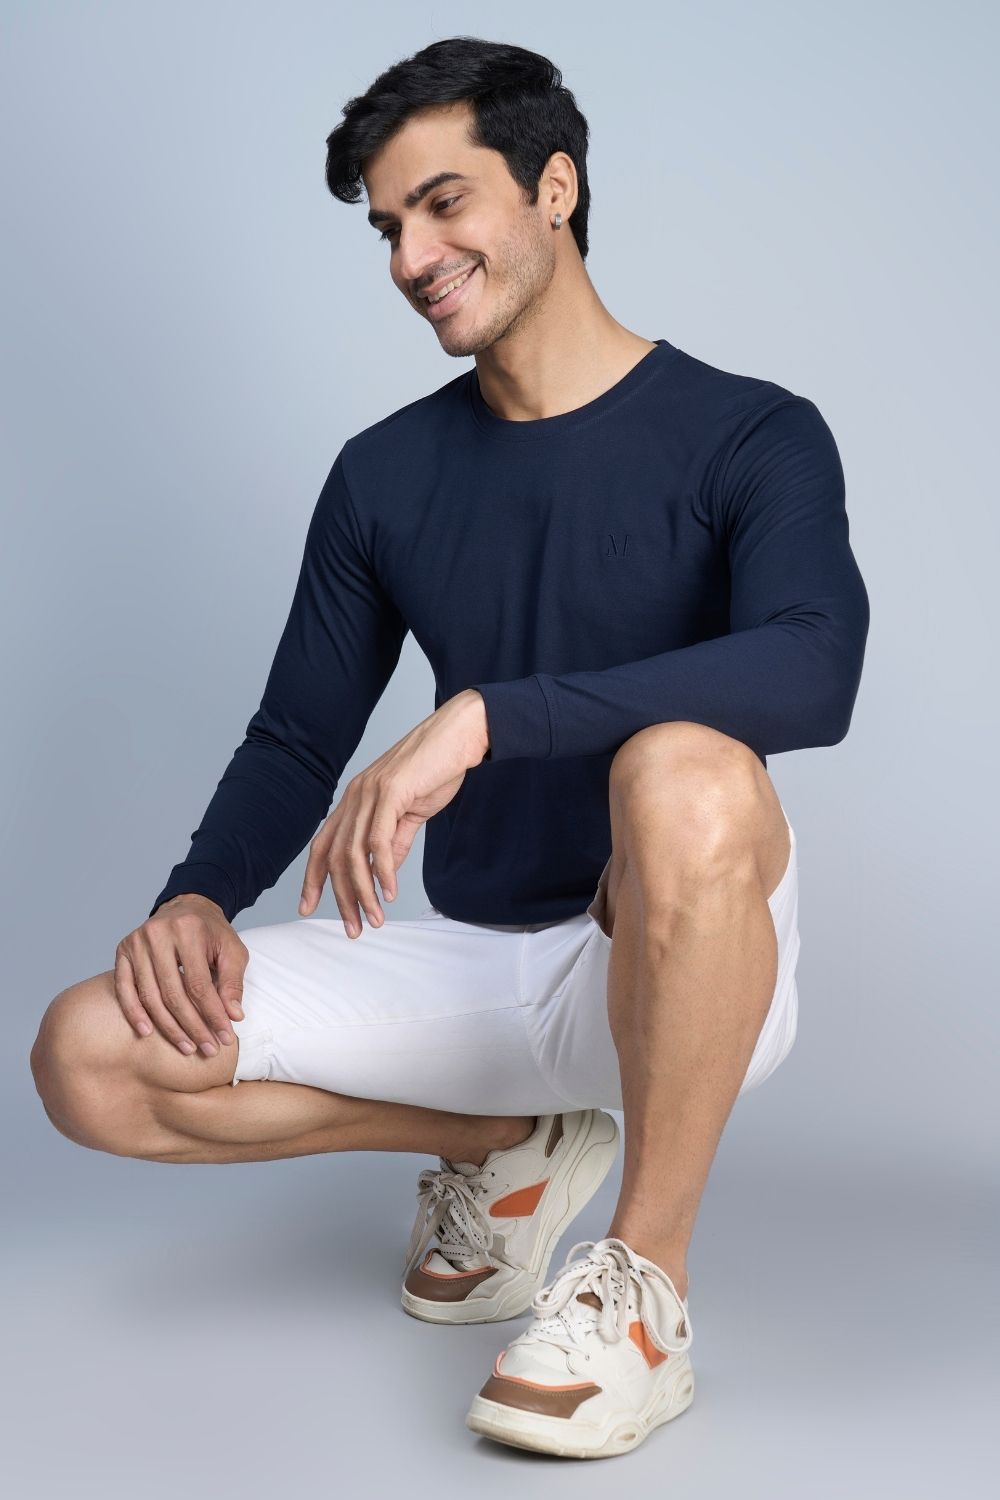 A model wearing Teal Navy colored, full sleeve solid T shirt for Men with round neck.